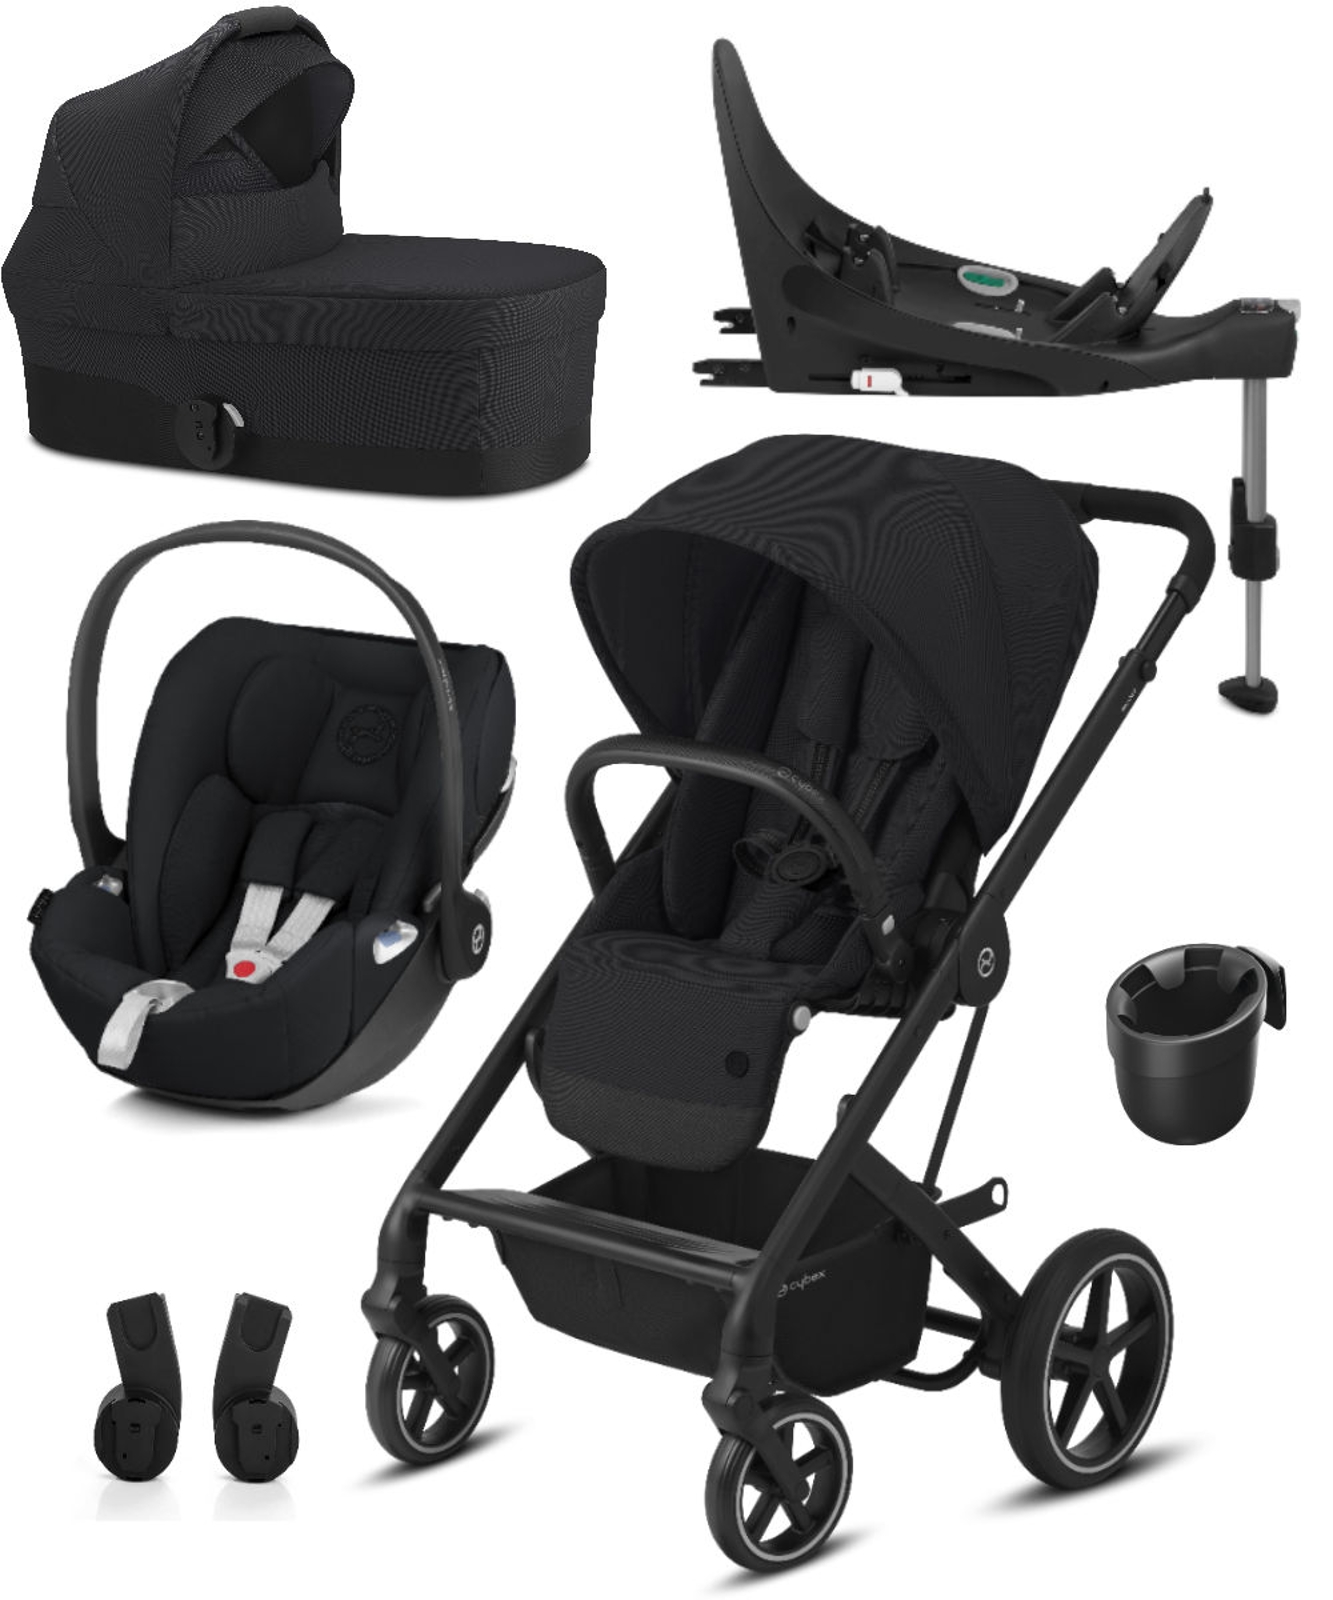 double buggy for 2 year old and newborn